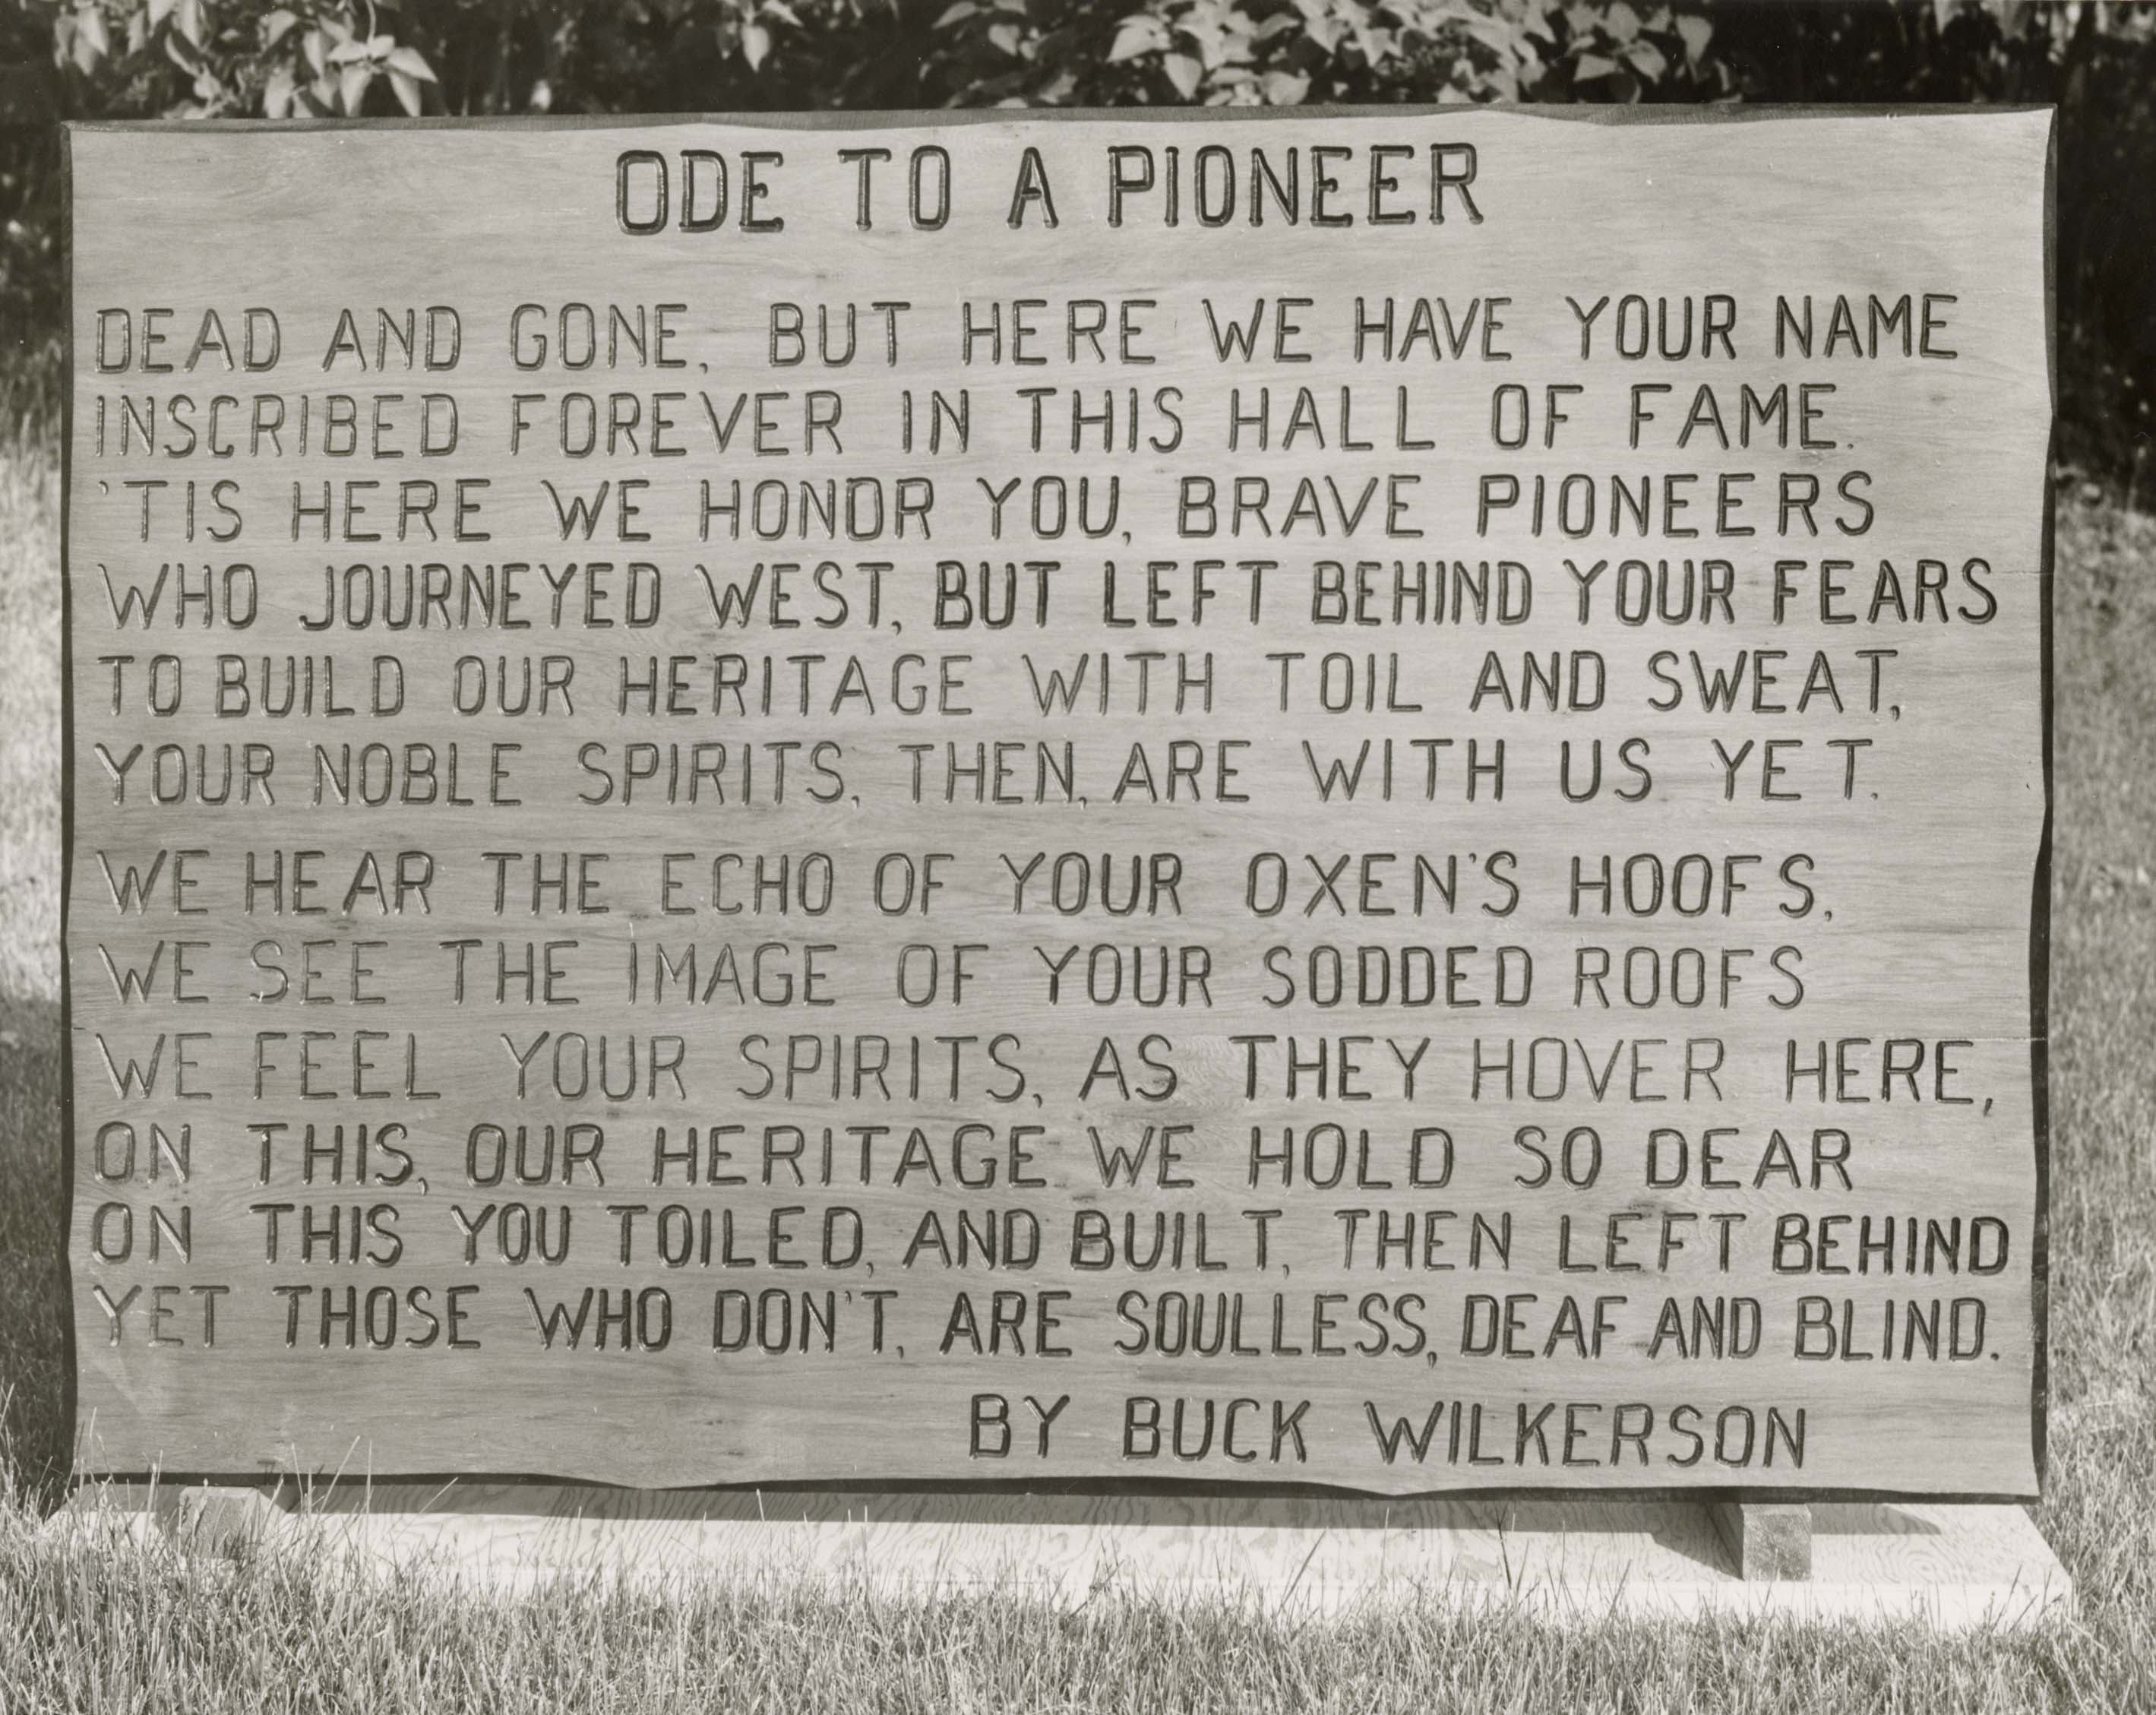 Ode to a pioneer